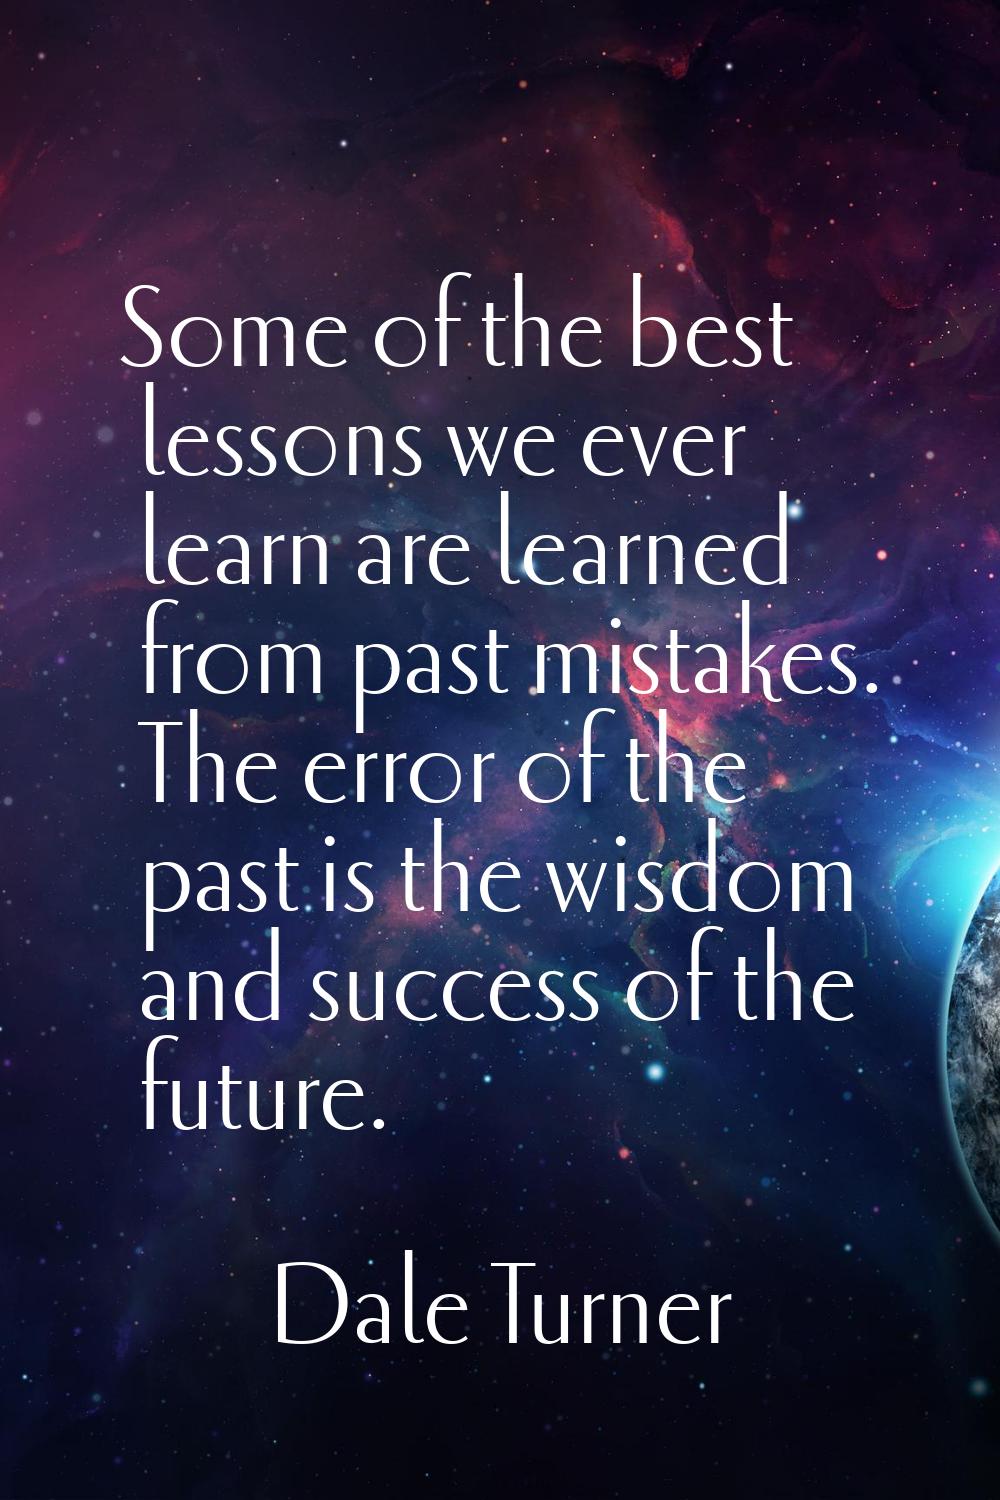 Some of the best lessons we ever learn are learned from past mistakes. The error of the past is the